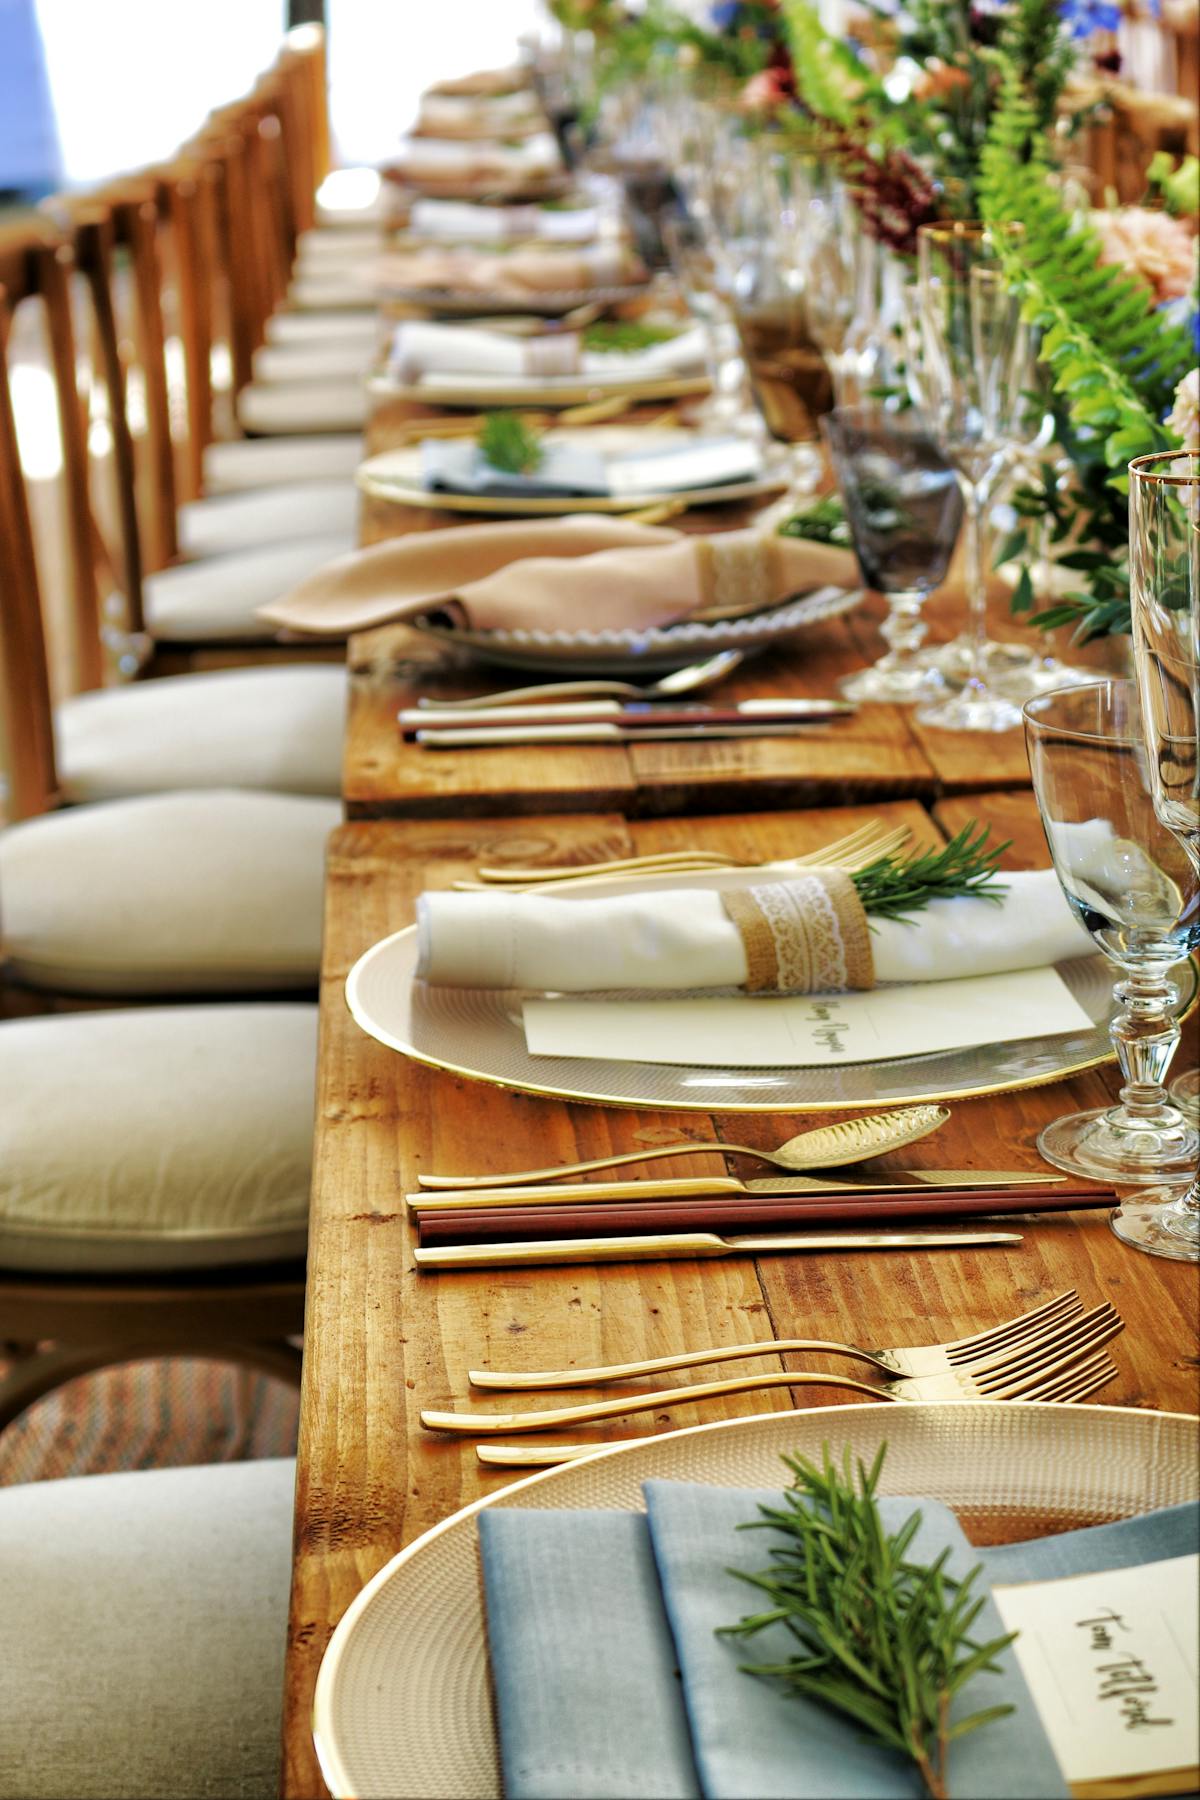 a wooden table lined with plates and silverware